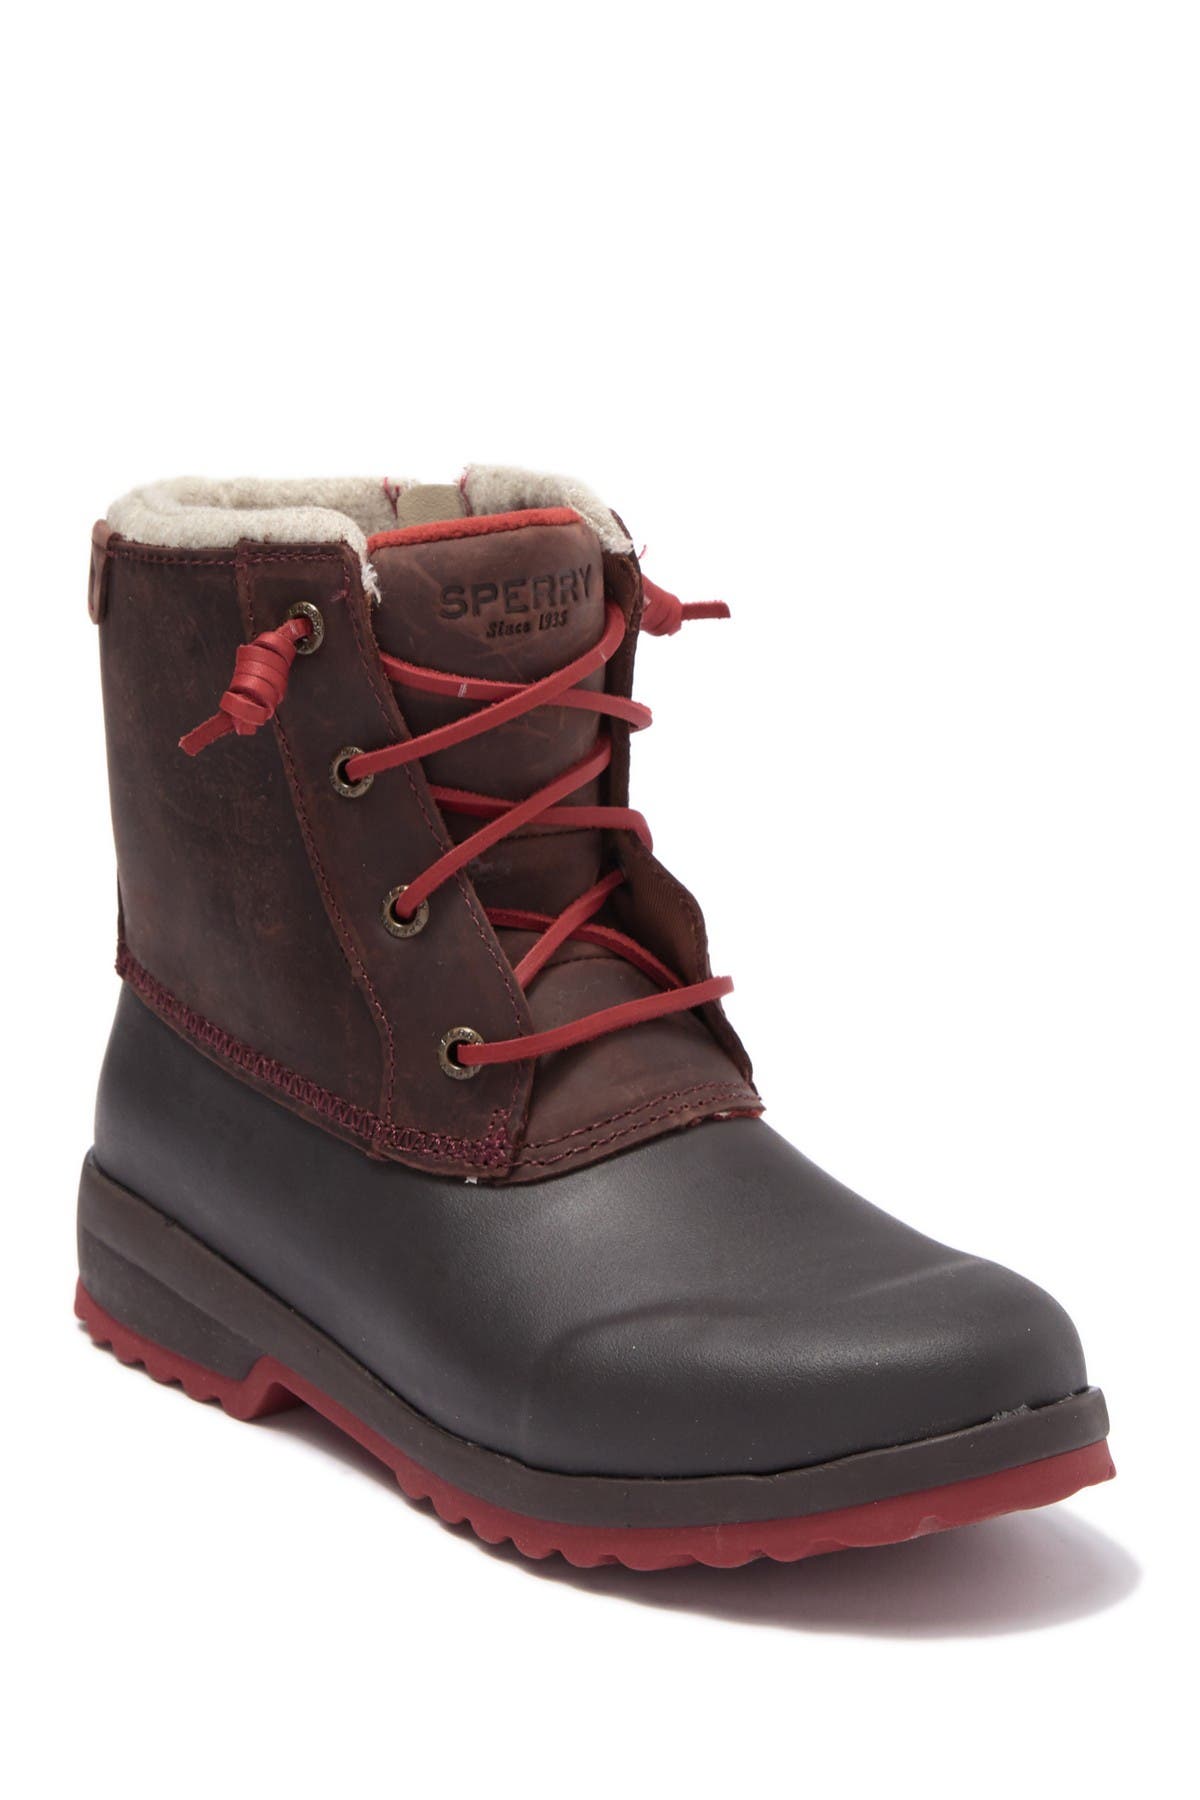 sperry insulated boots